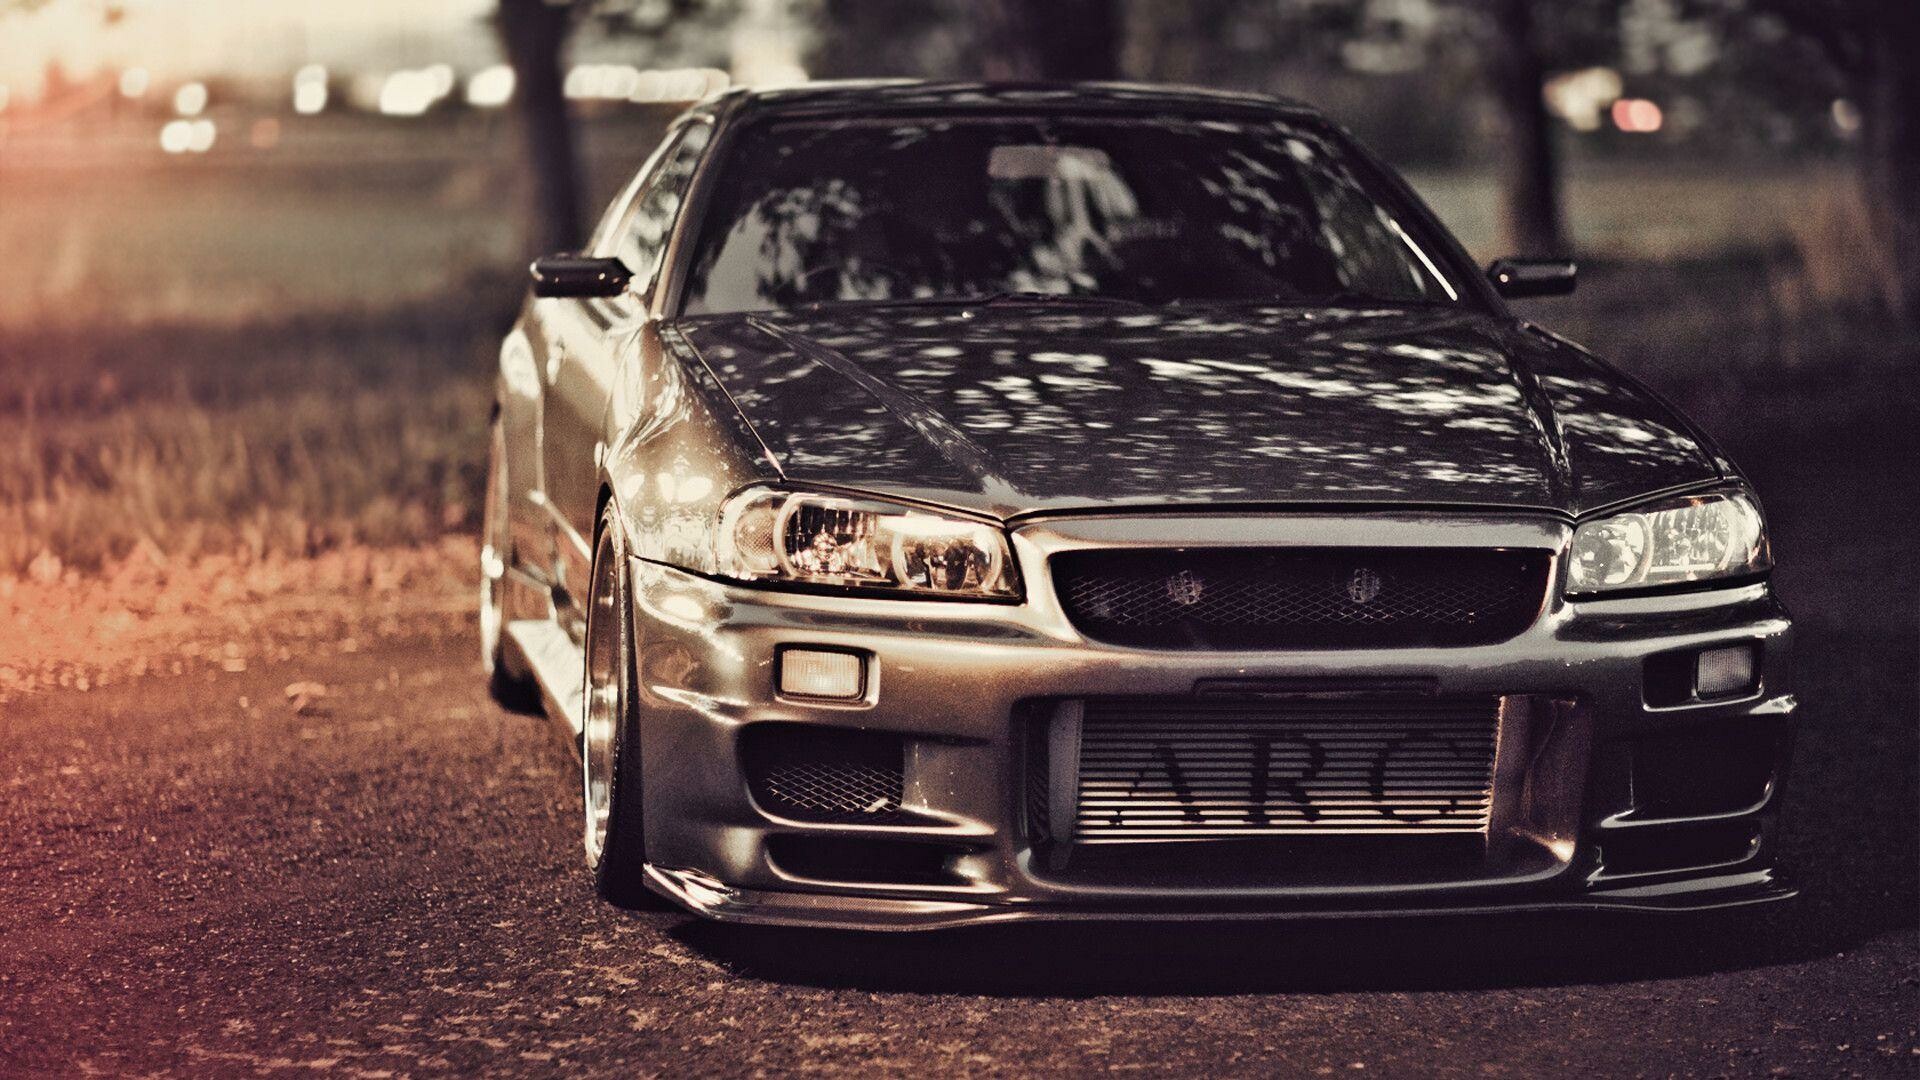 Nissan: R34 Skyline GT-R, Introduced in 1998, and was available from 1998 to 2002. 1920x1080 Full HD Wallpaper.